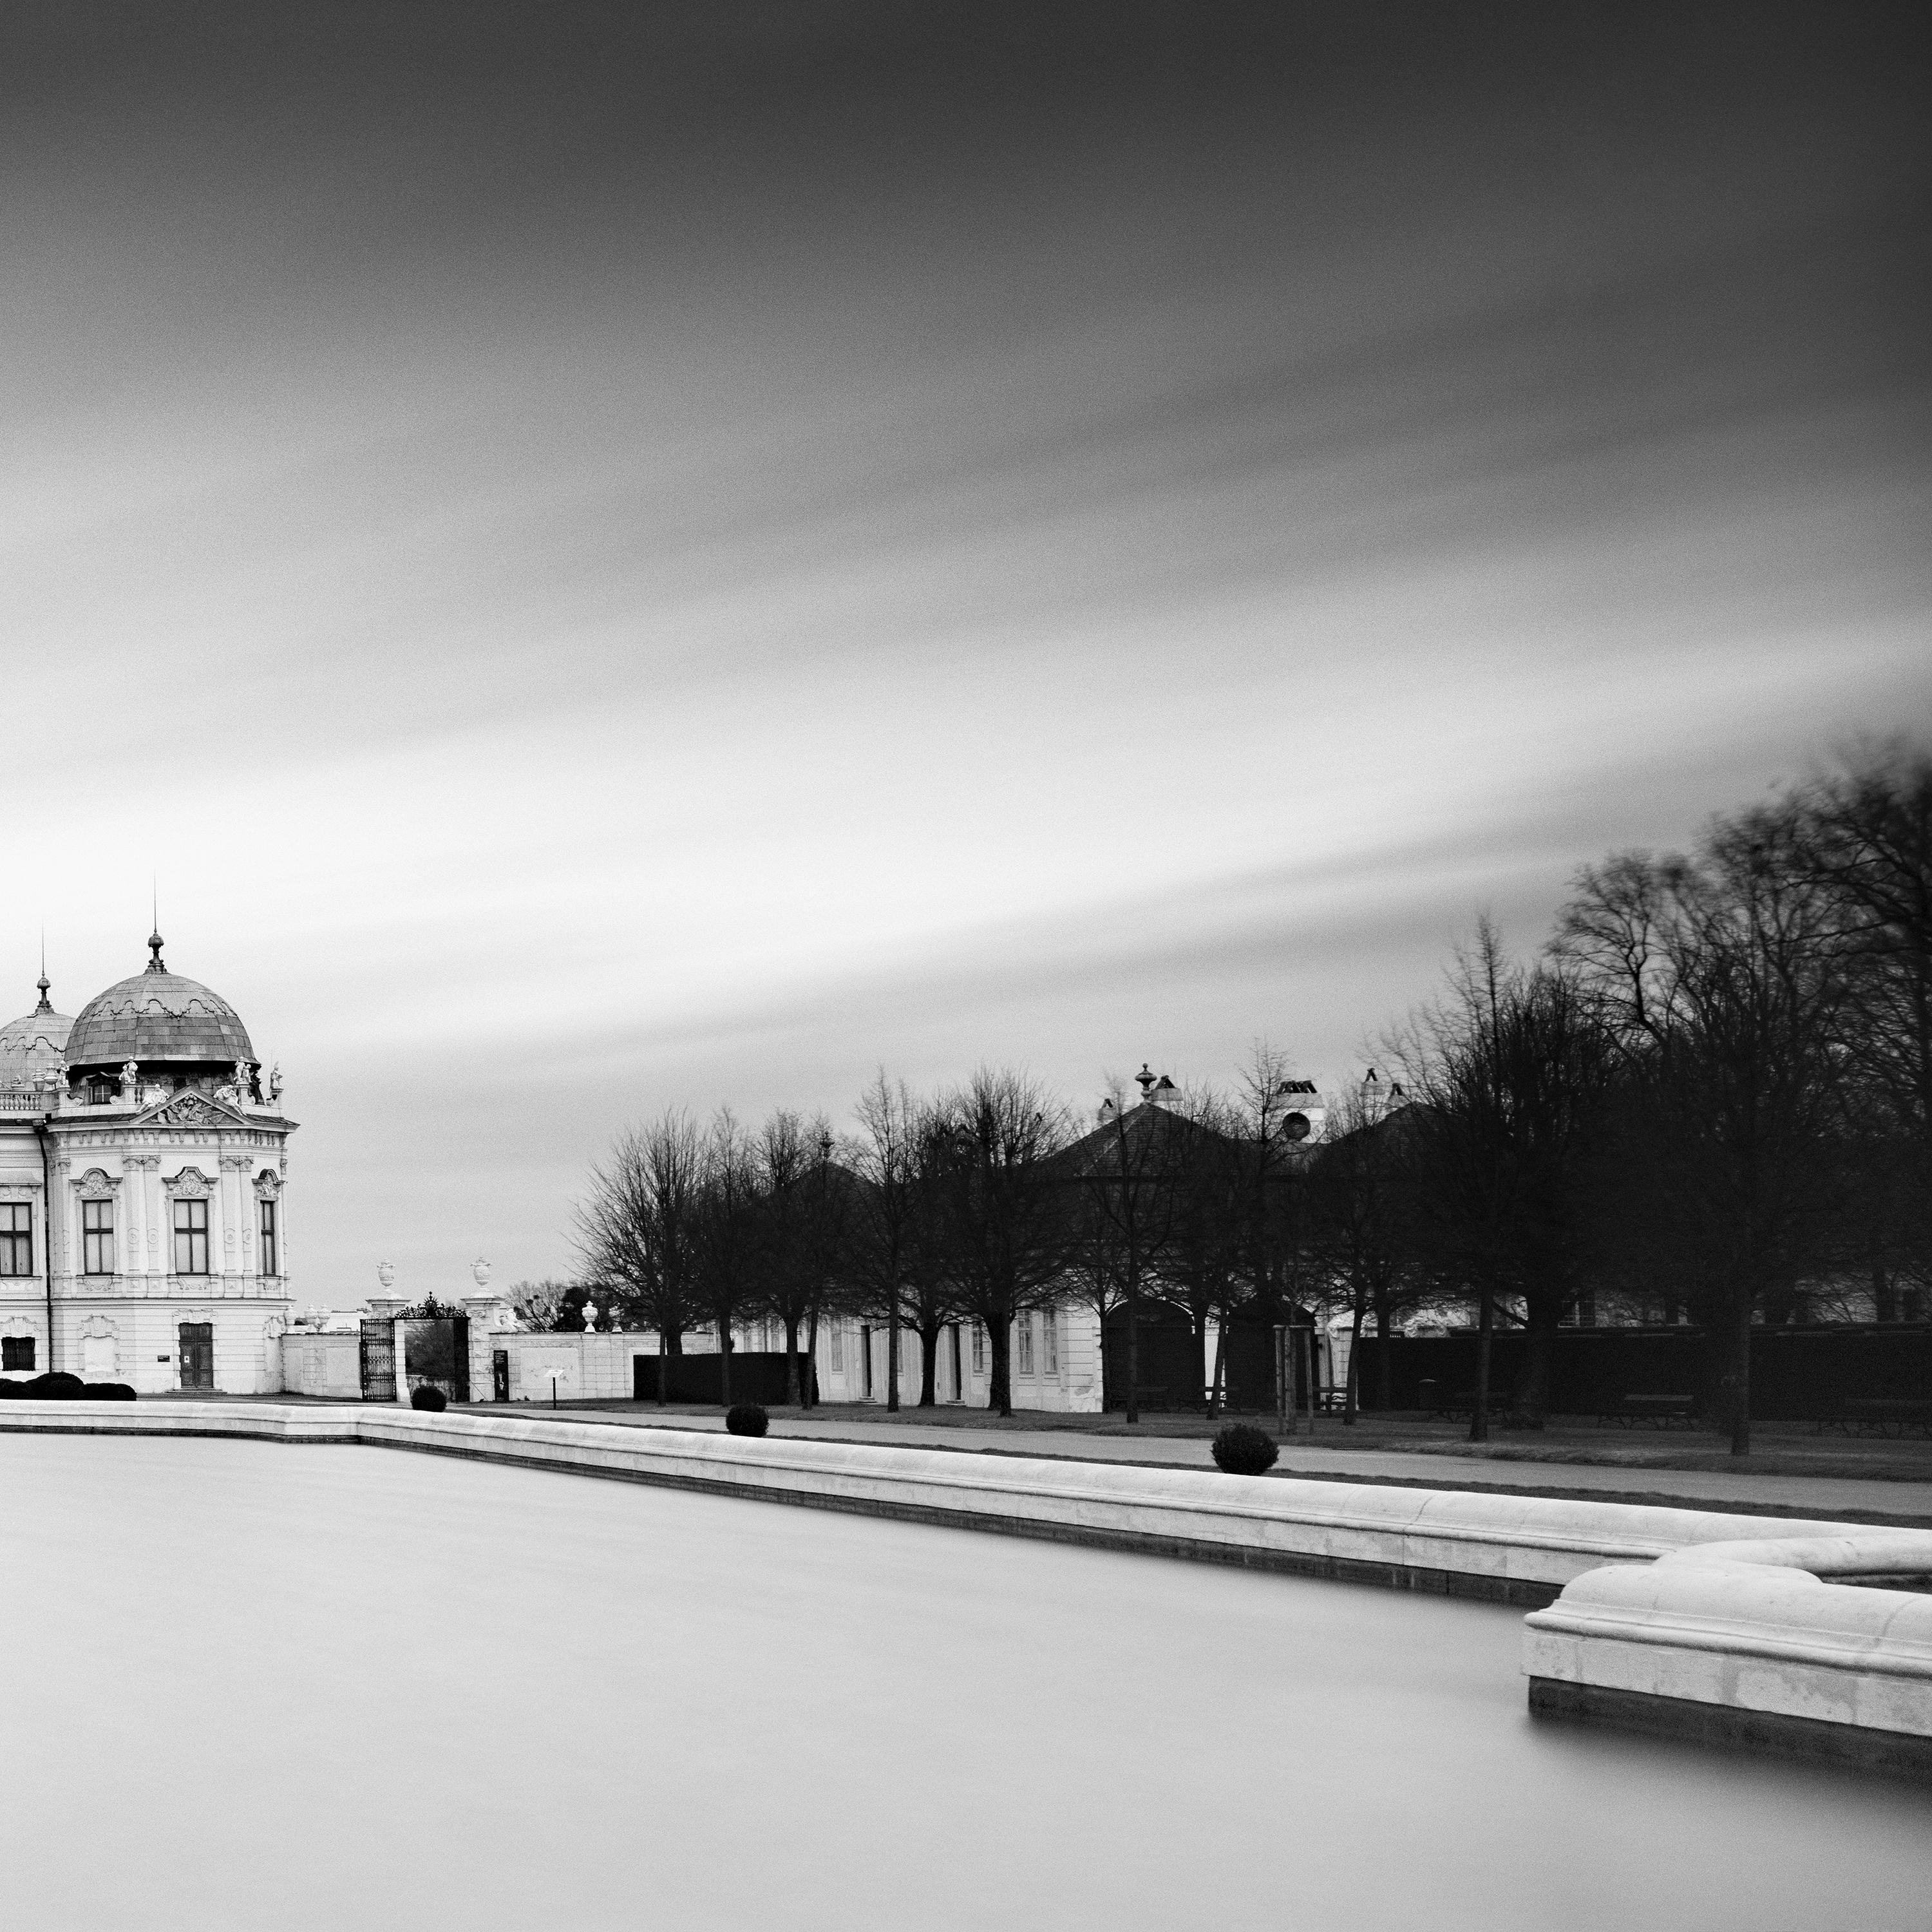 Upper Belvedere palace, Panorama, Vienna, black & white landscape photography For Sale 2